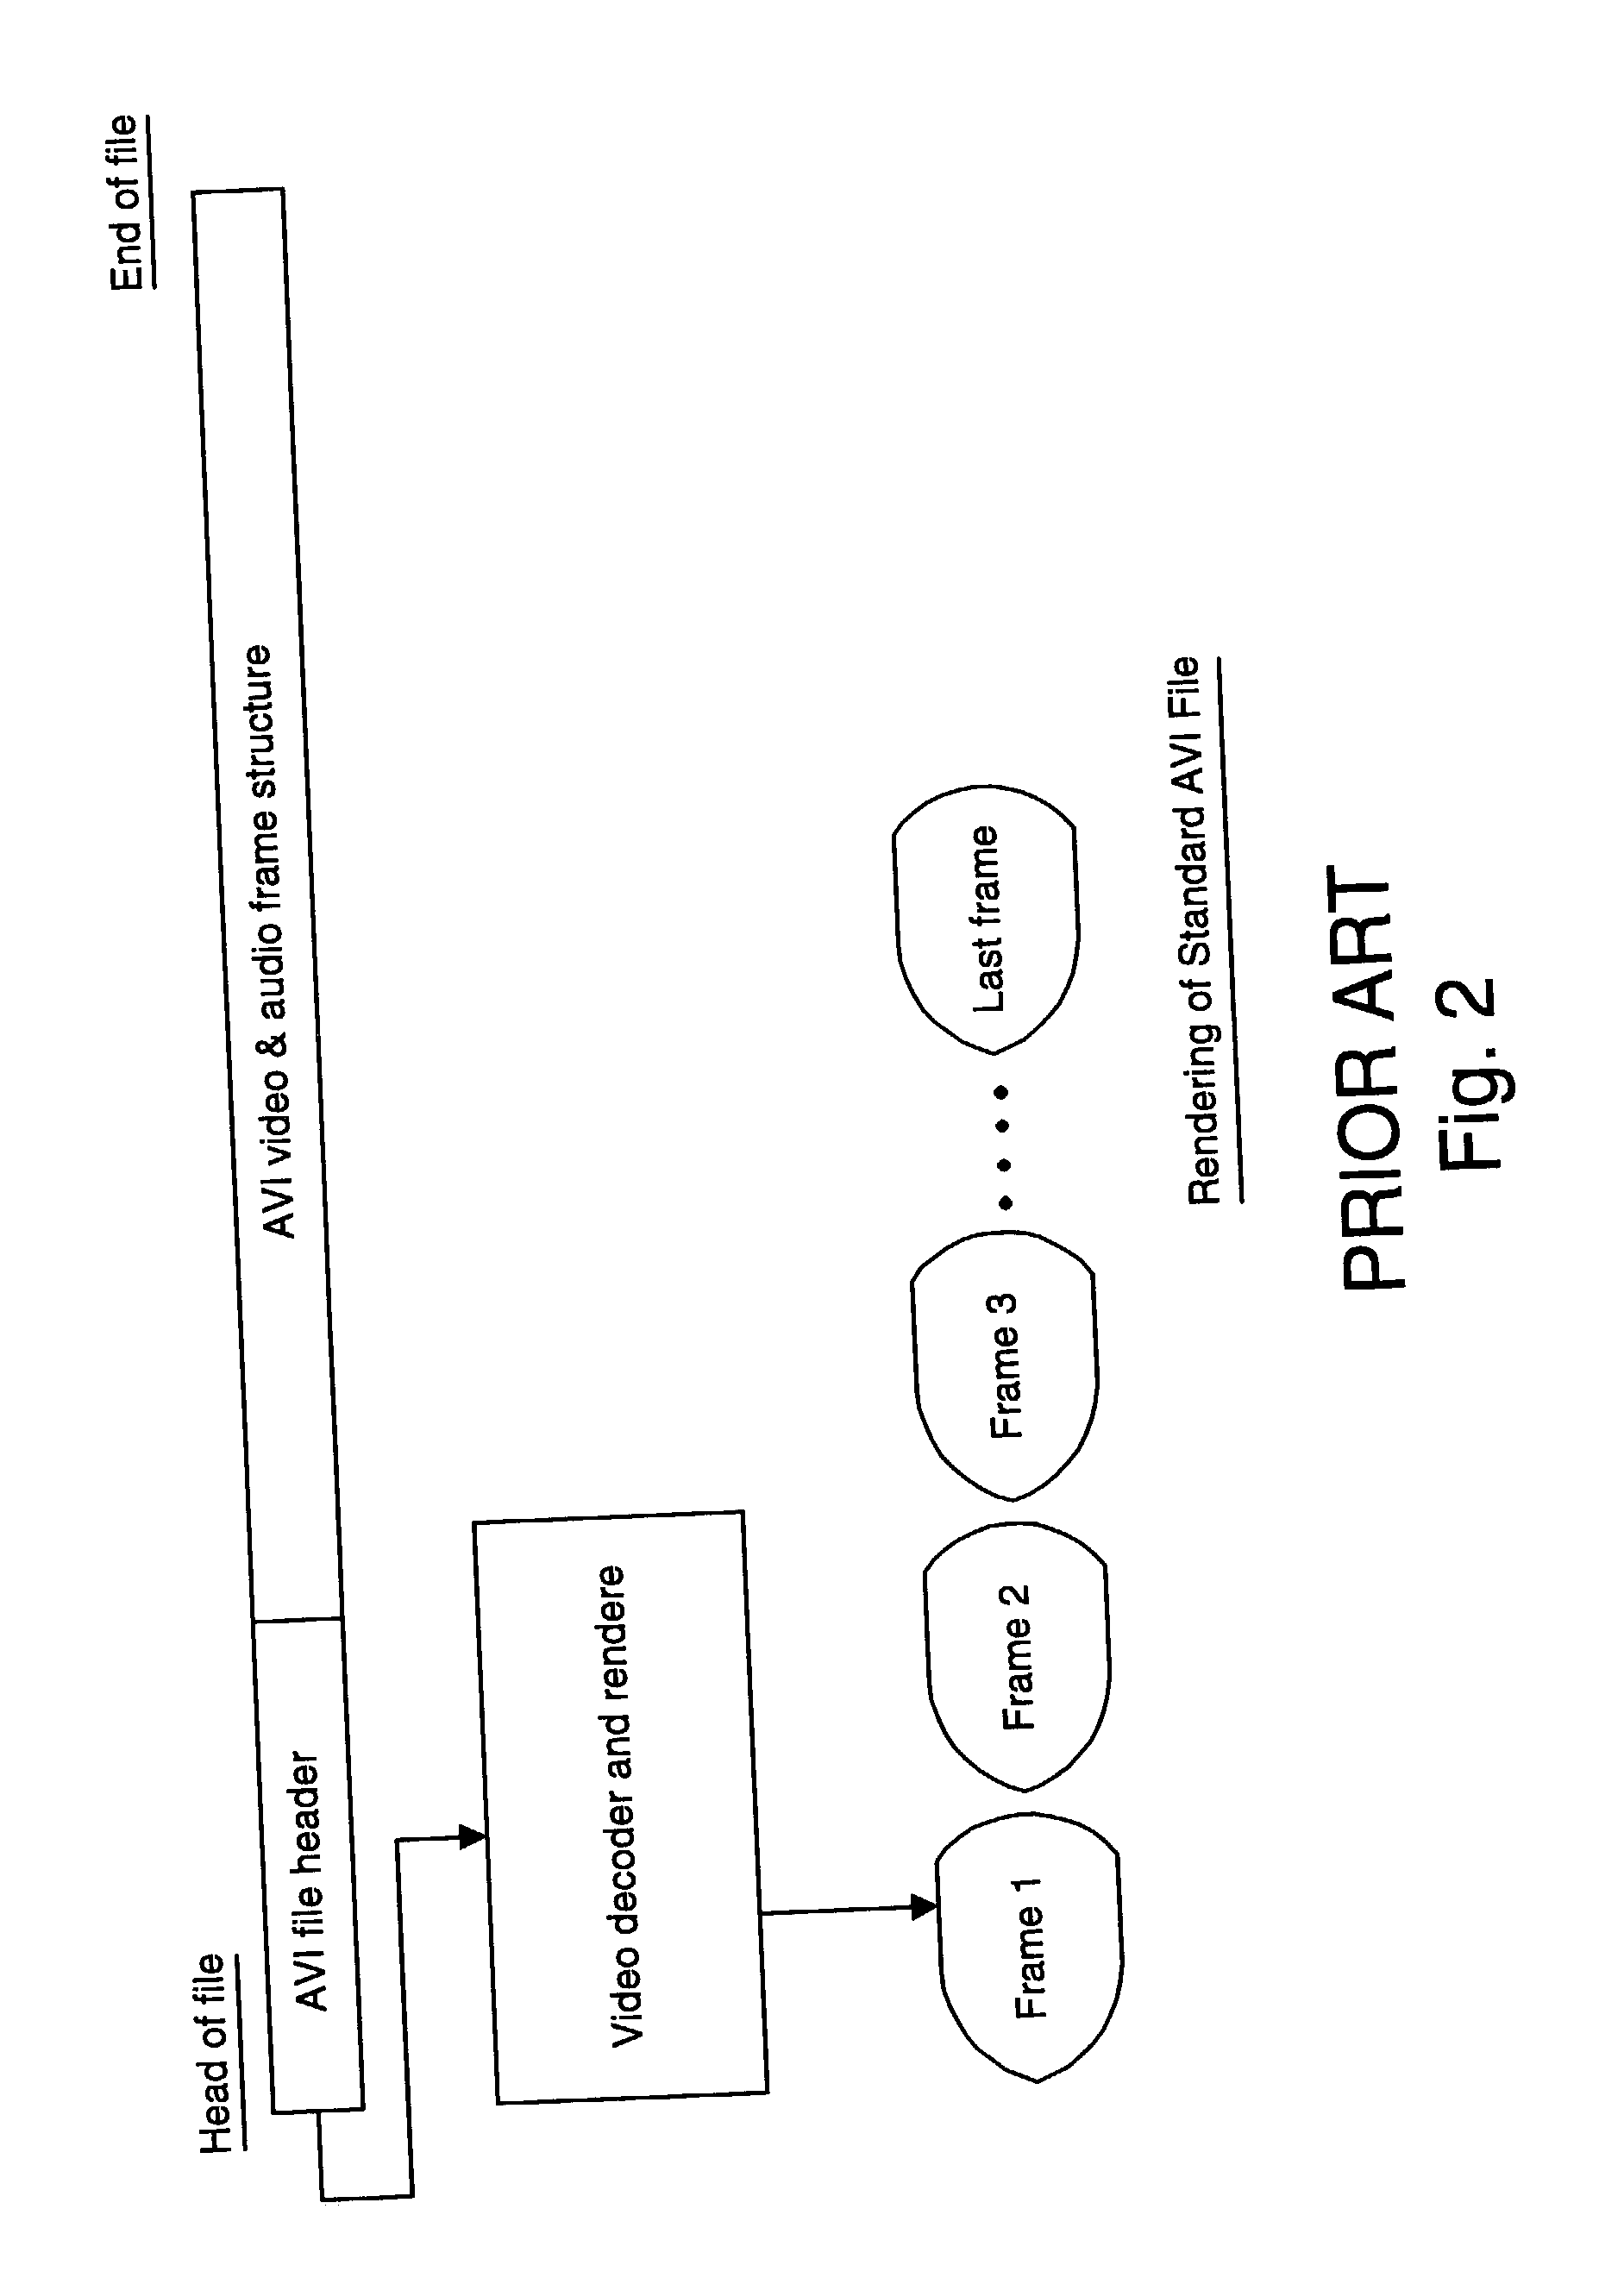 Video event capturing system and method